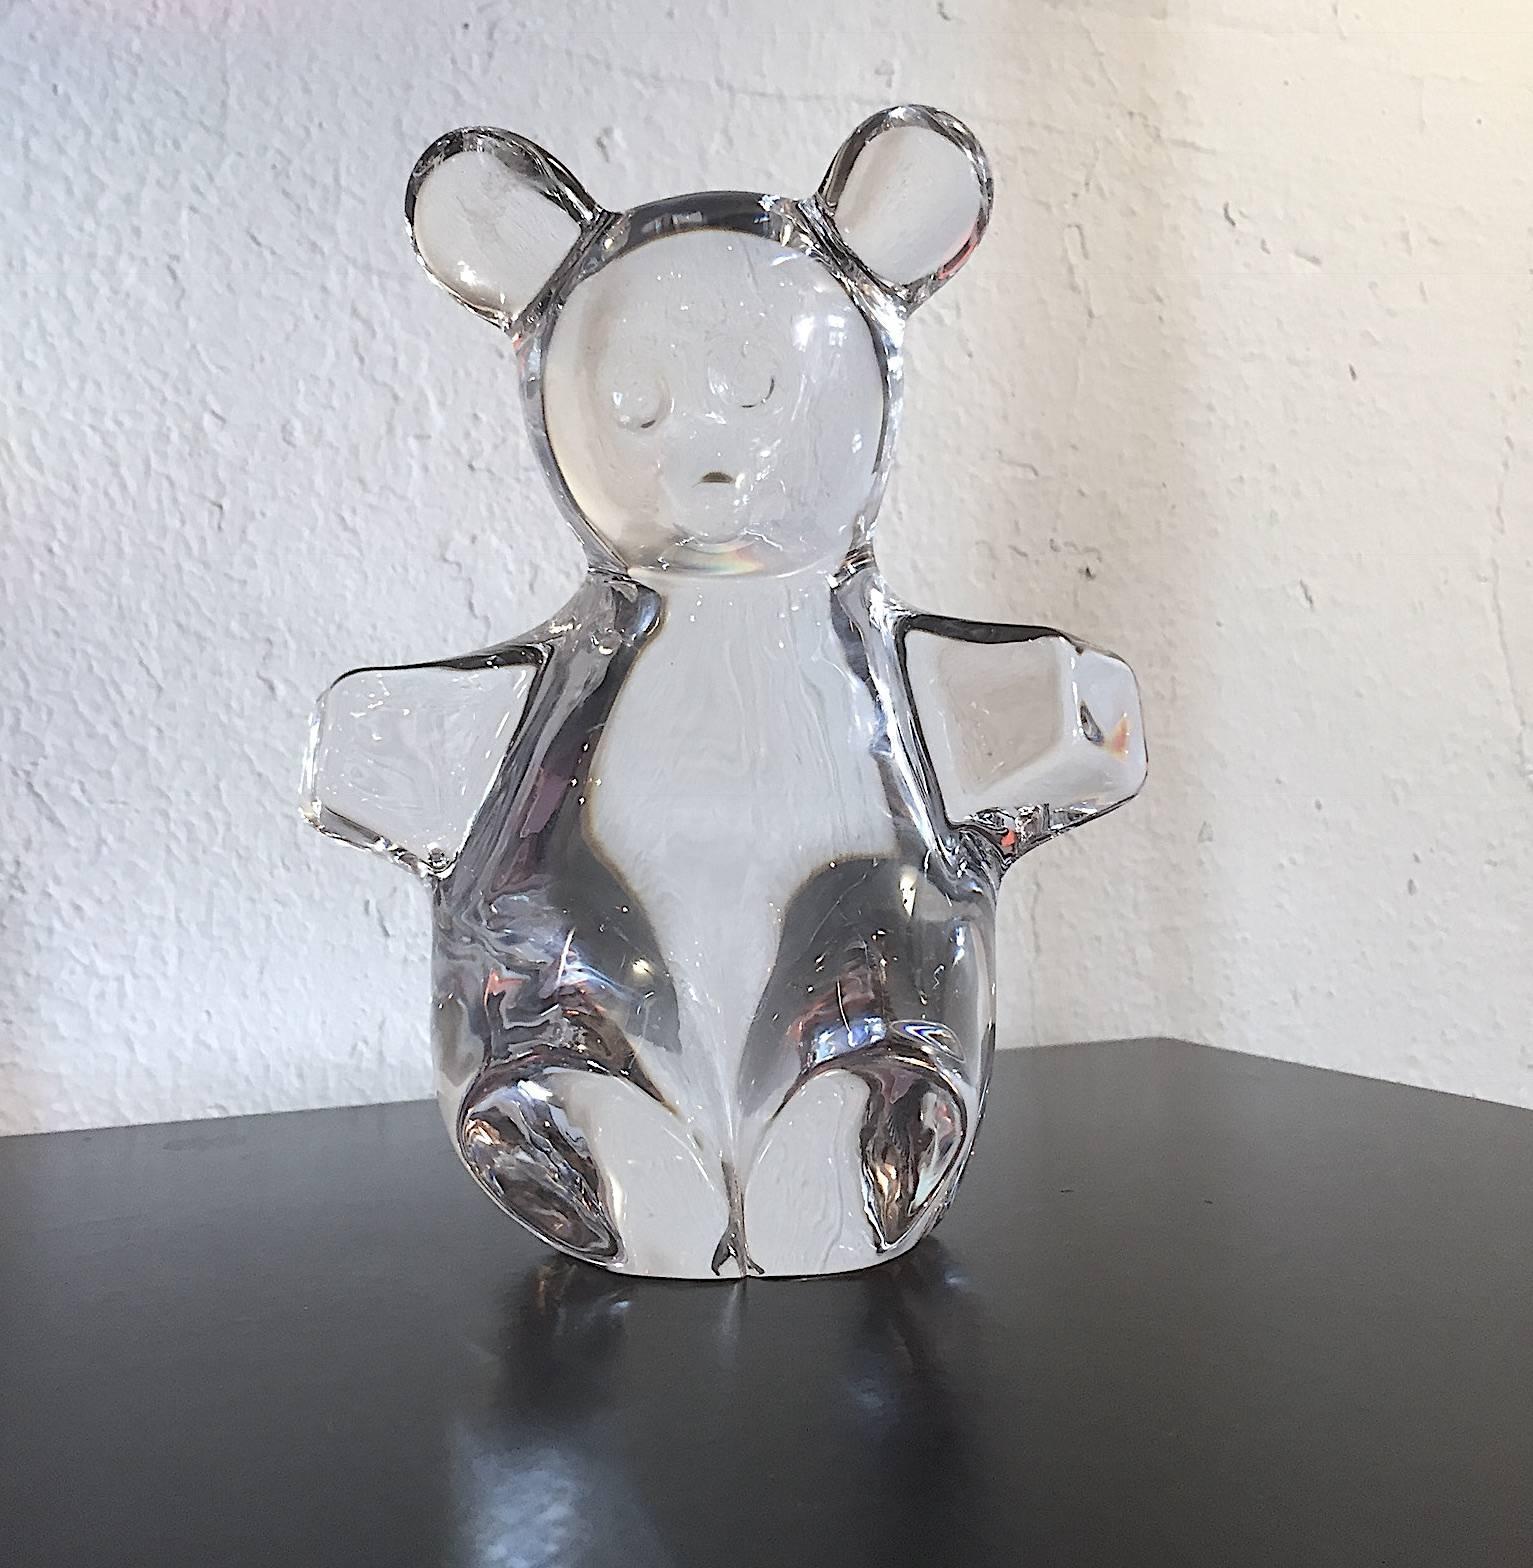 Crystal glass teddy bear figurine signed, Daum, France, 7 inches tall, signed 